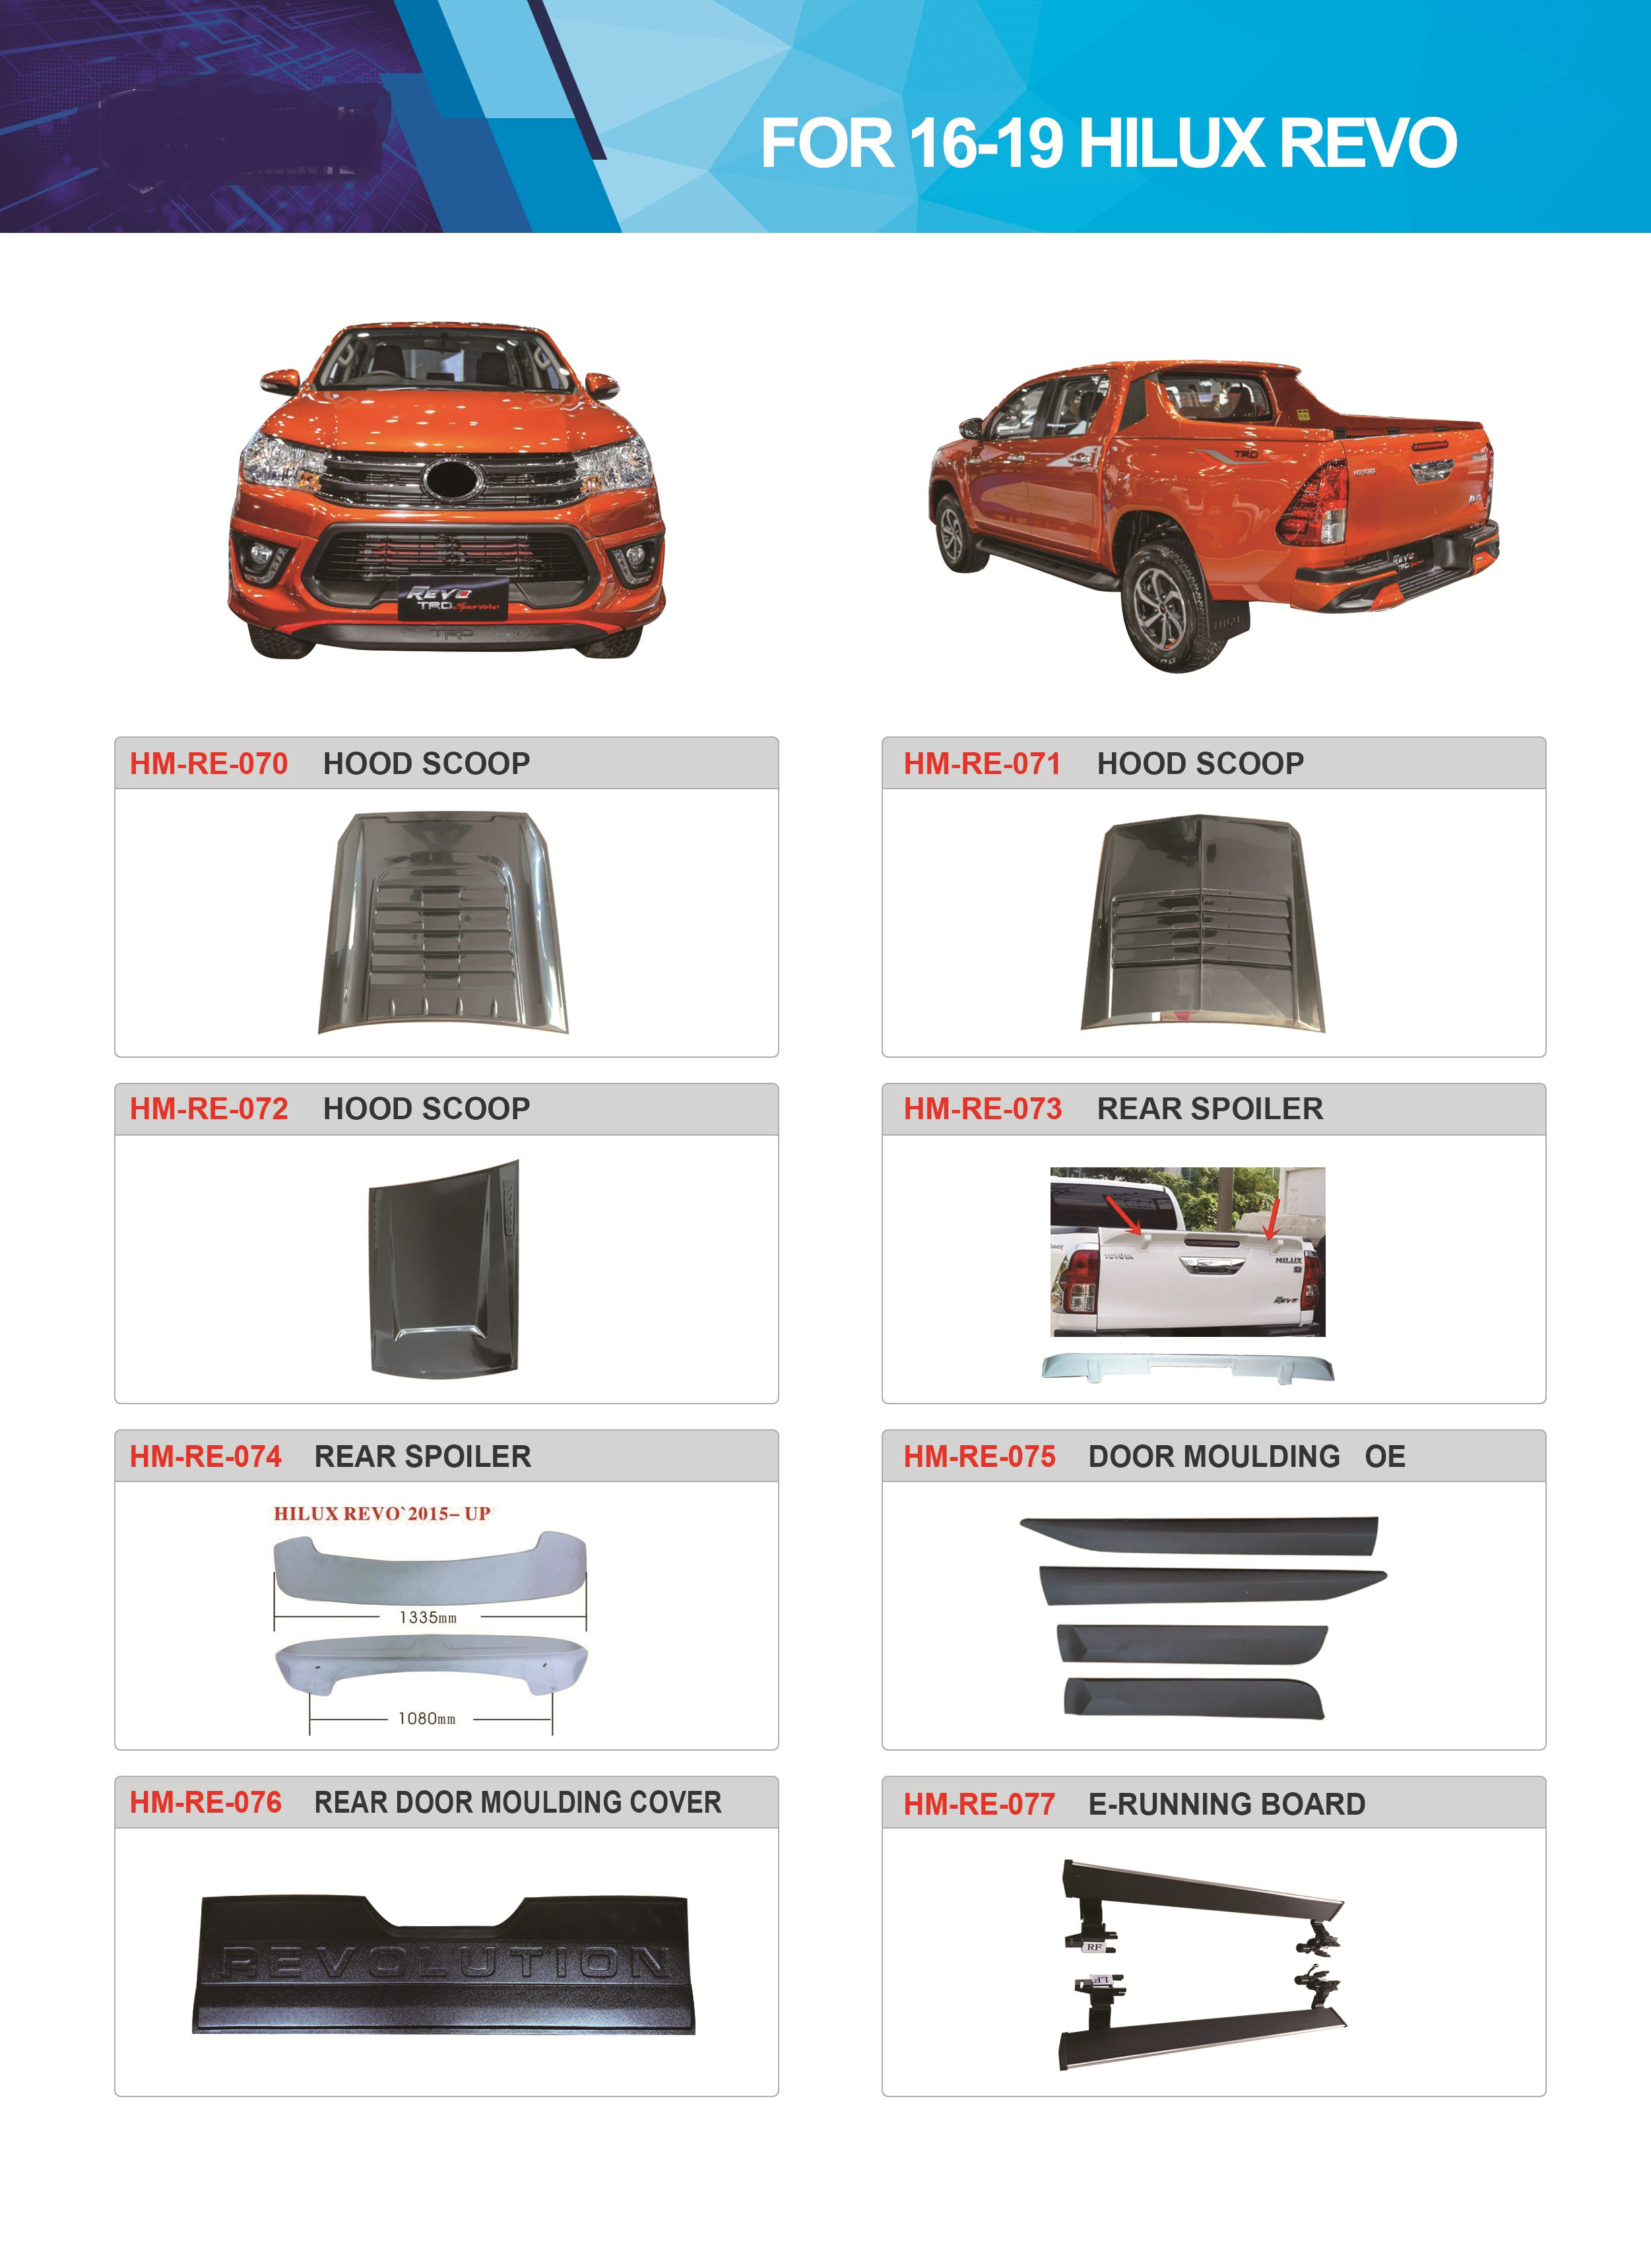 For 16-19 Hilux Revo Featured Image